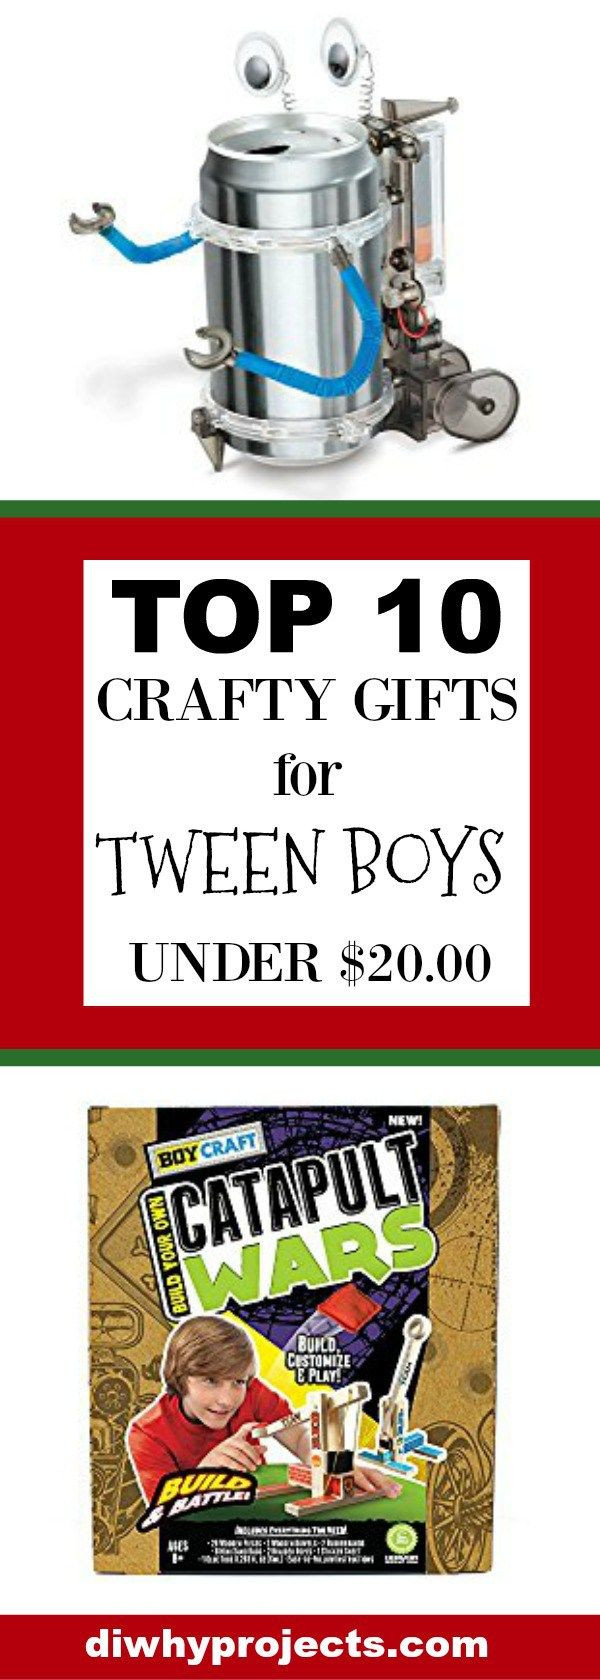 Great Gift Ideas For Boys
 Top 10 Crafty Gift Ideas for Tween Boys 2017 Christmas